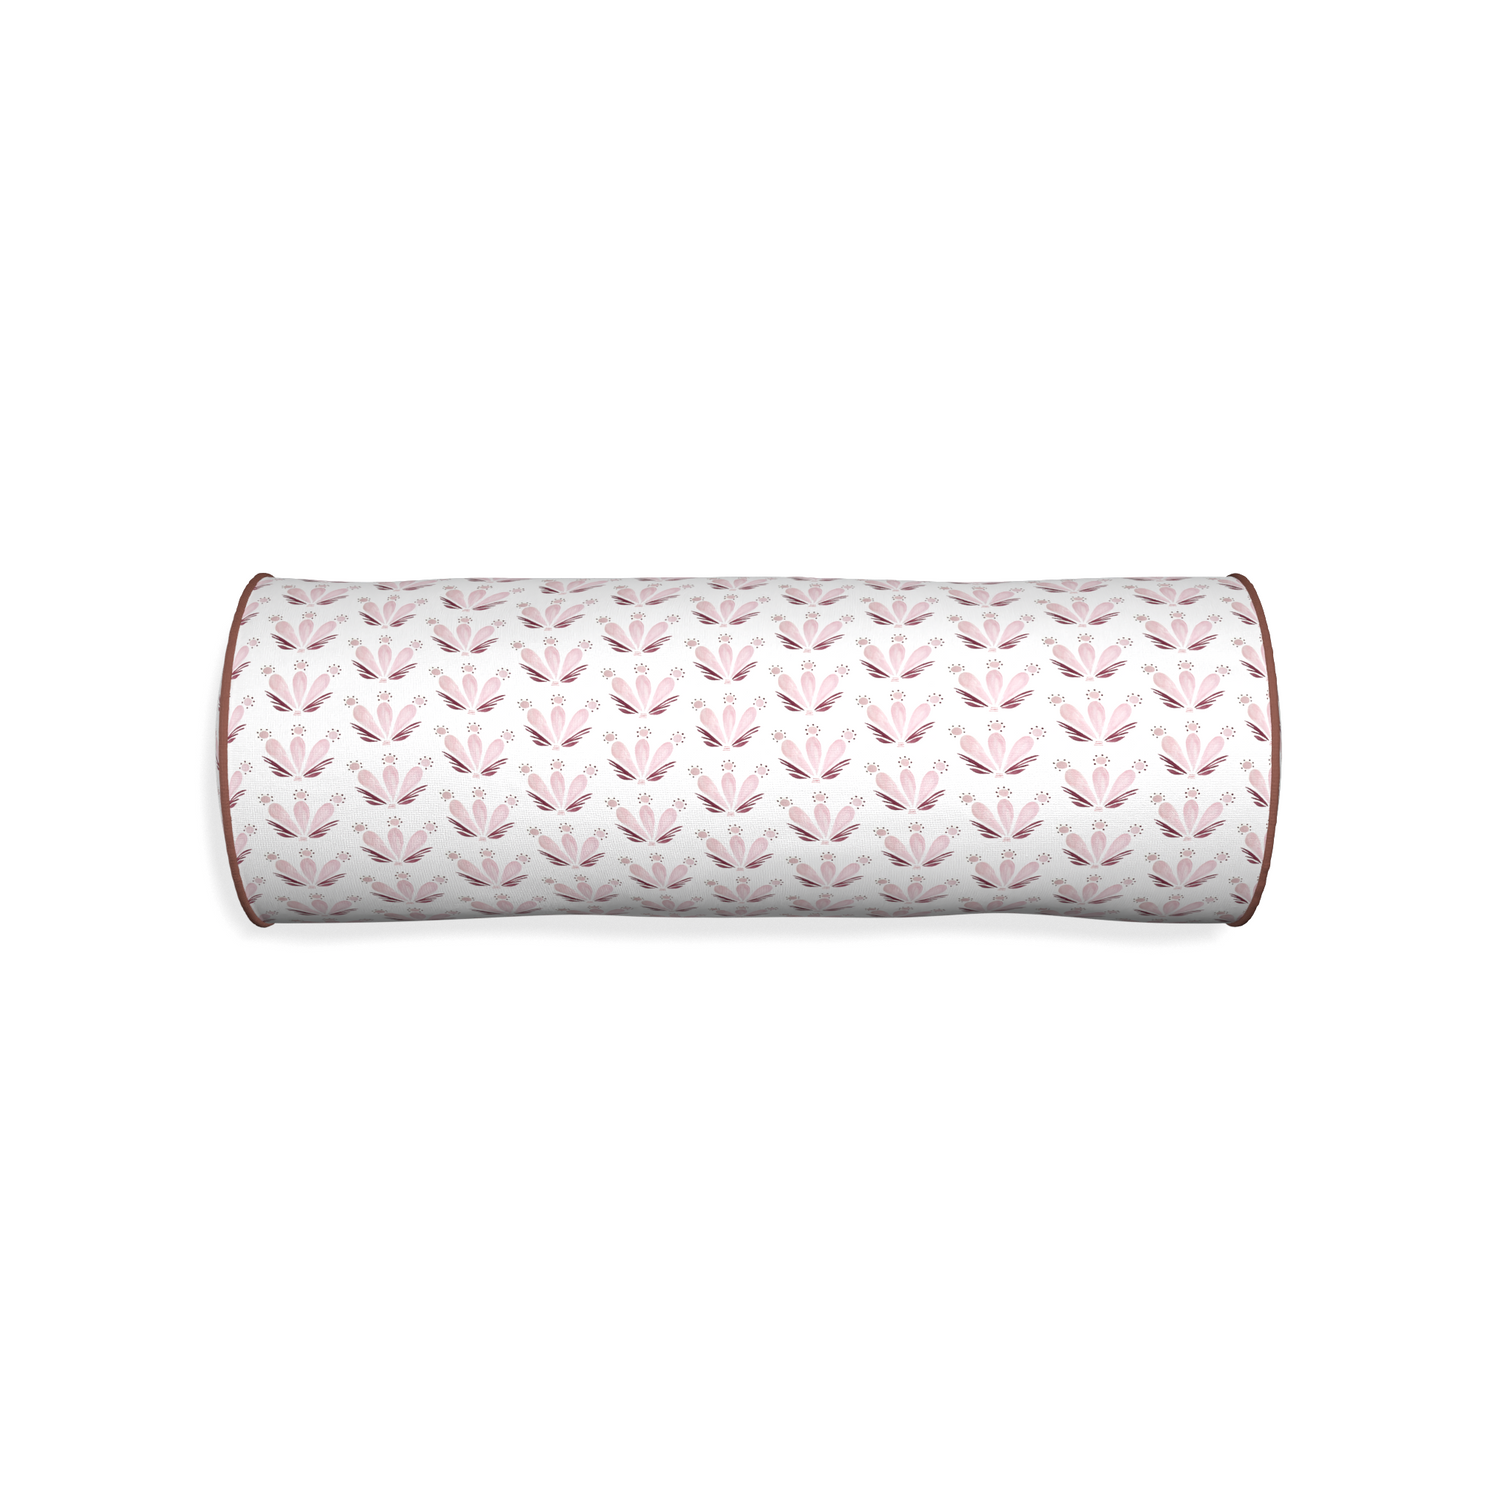 Bolster serena pink custom pink & burgundy drop repeat floralpillow with w piping on white background